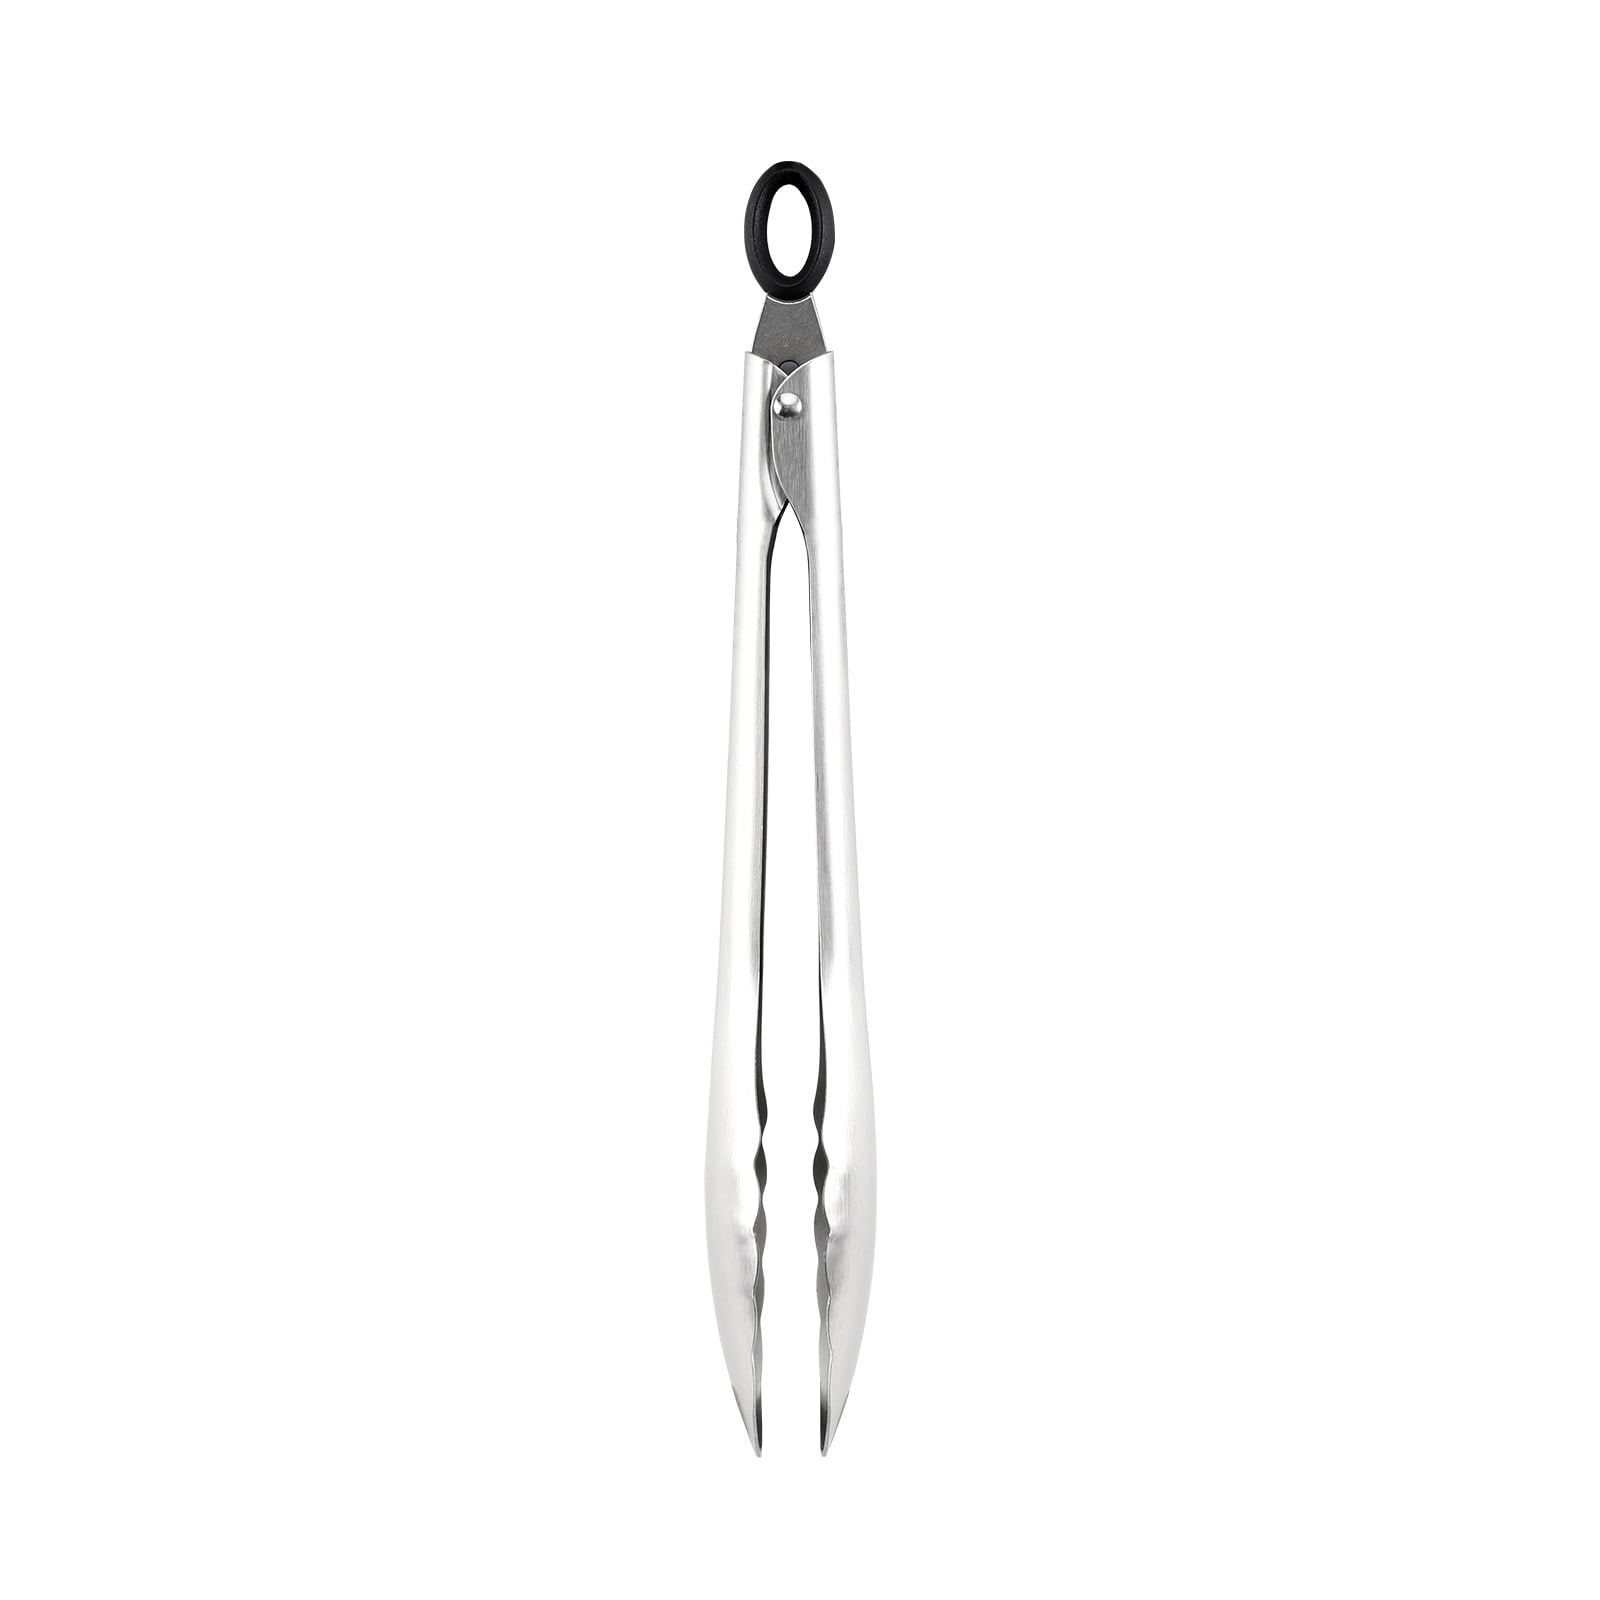 Craft Kitchen Stainless Steel 10inch Tong - Walmart.com